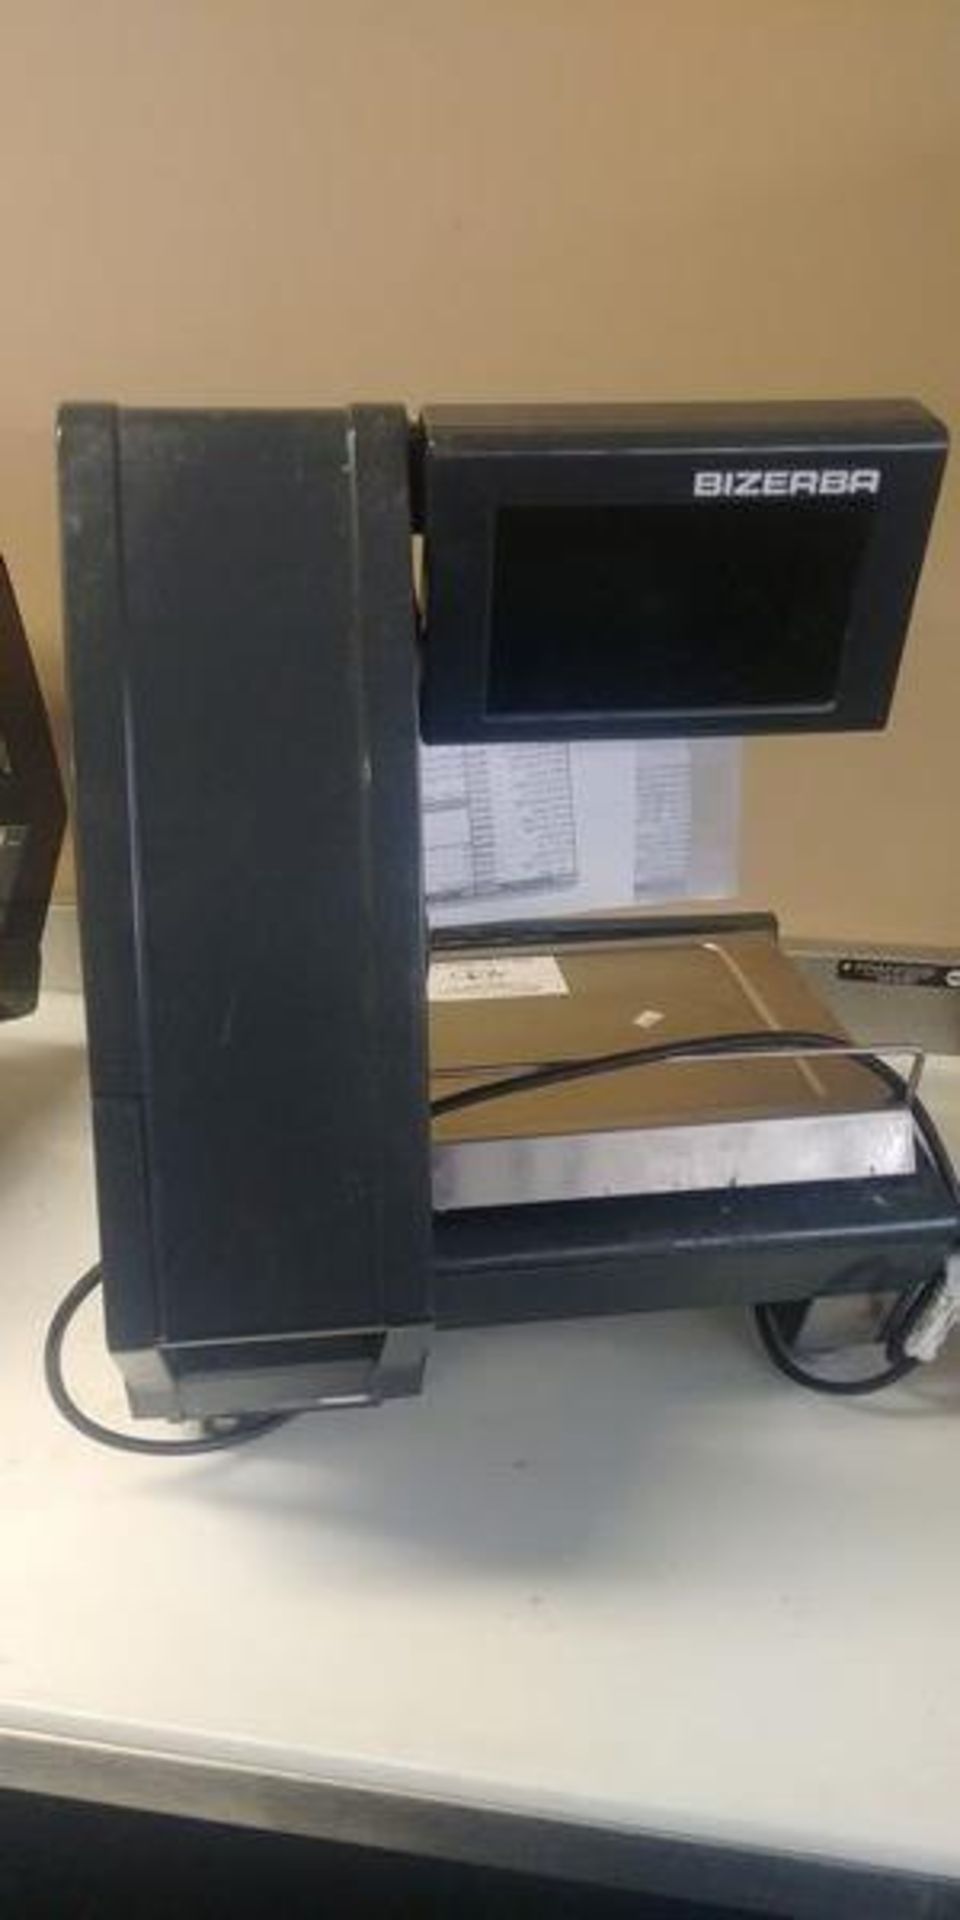 Bizerba Weighing Scale with Readout and Printer - Model KH200 - Image 2 of 2